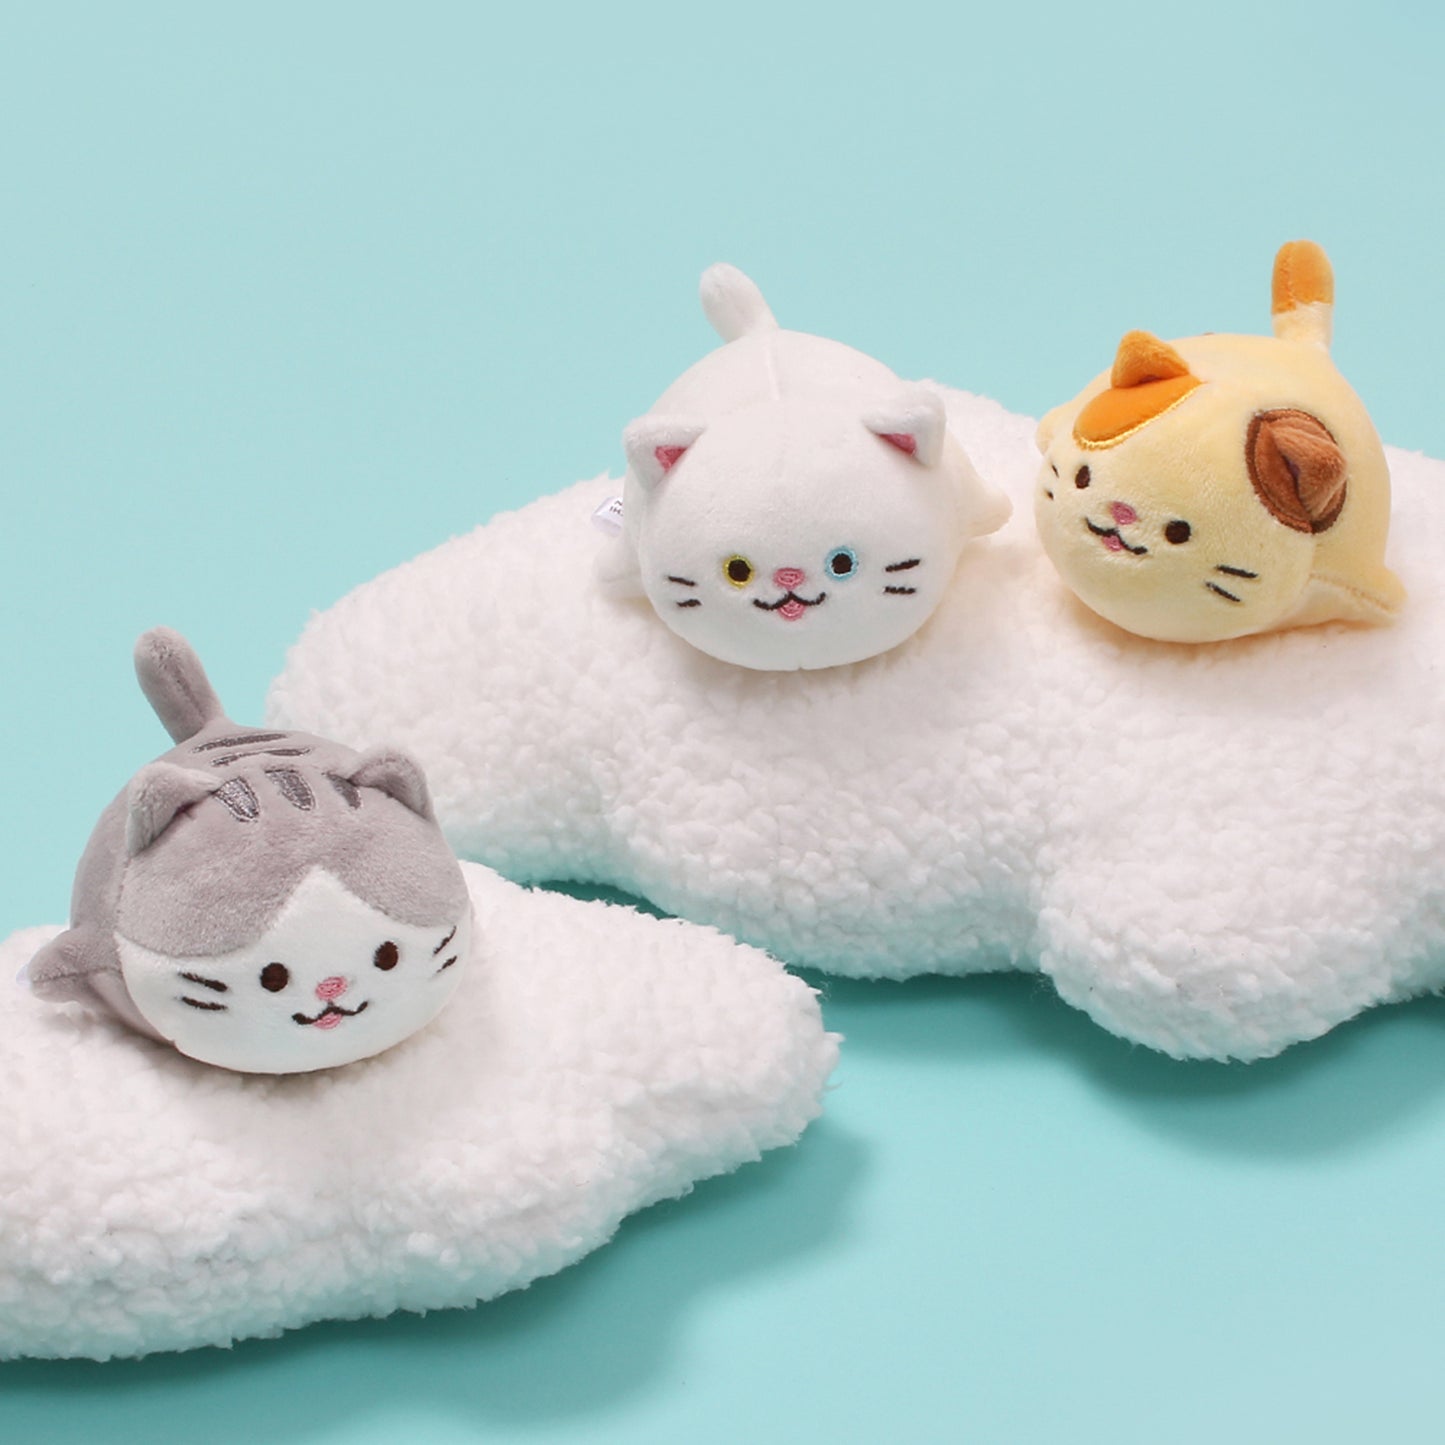 The whole cat trio: Mackerel, Odd, and Cheese, together on white cloud plushes on teal background.